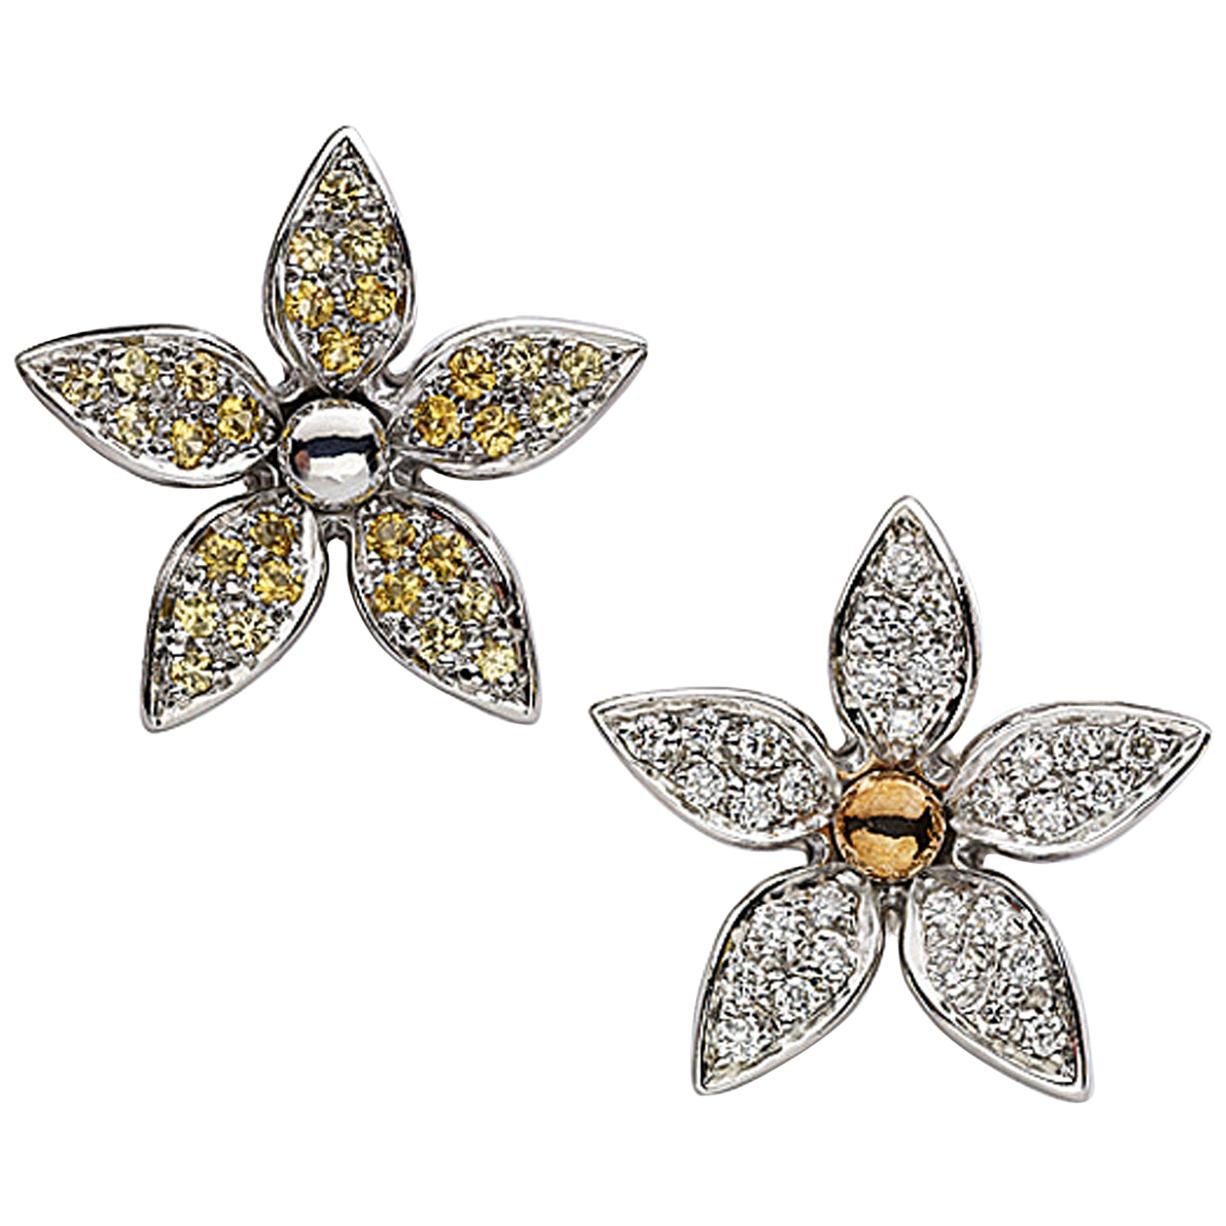 White Diamond Yellow Sapphire 18 Karat Gold Flower Stud Earrings Made in Italy For Sale